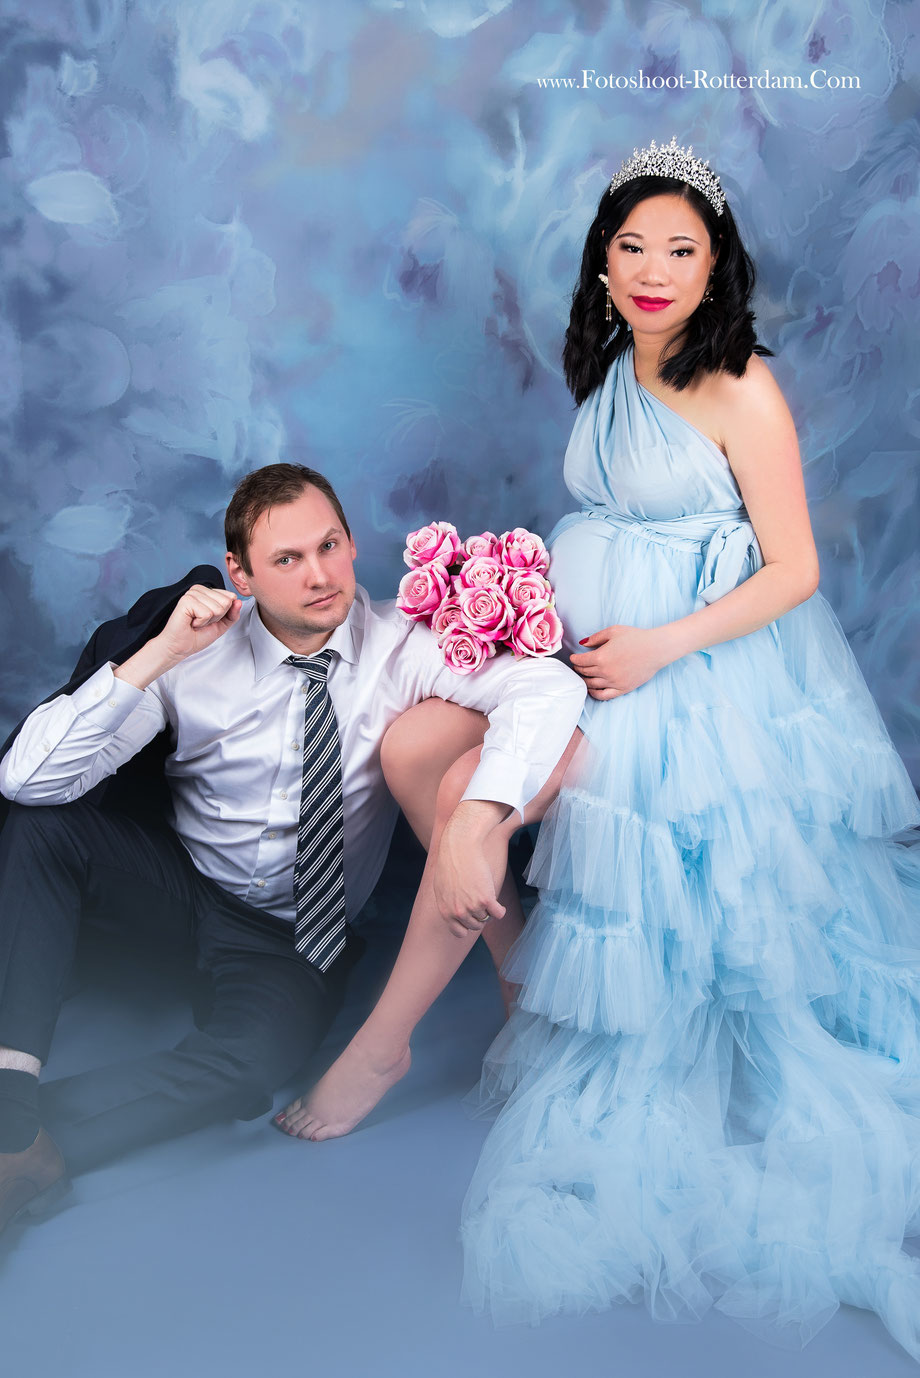 pregnancy shoot with roses and partner